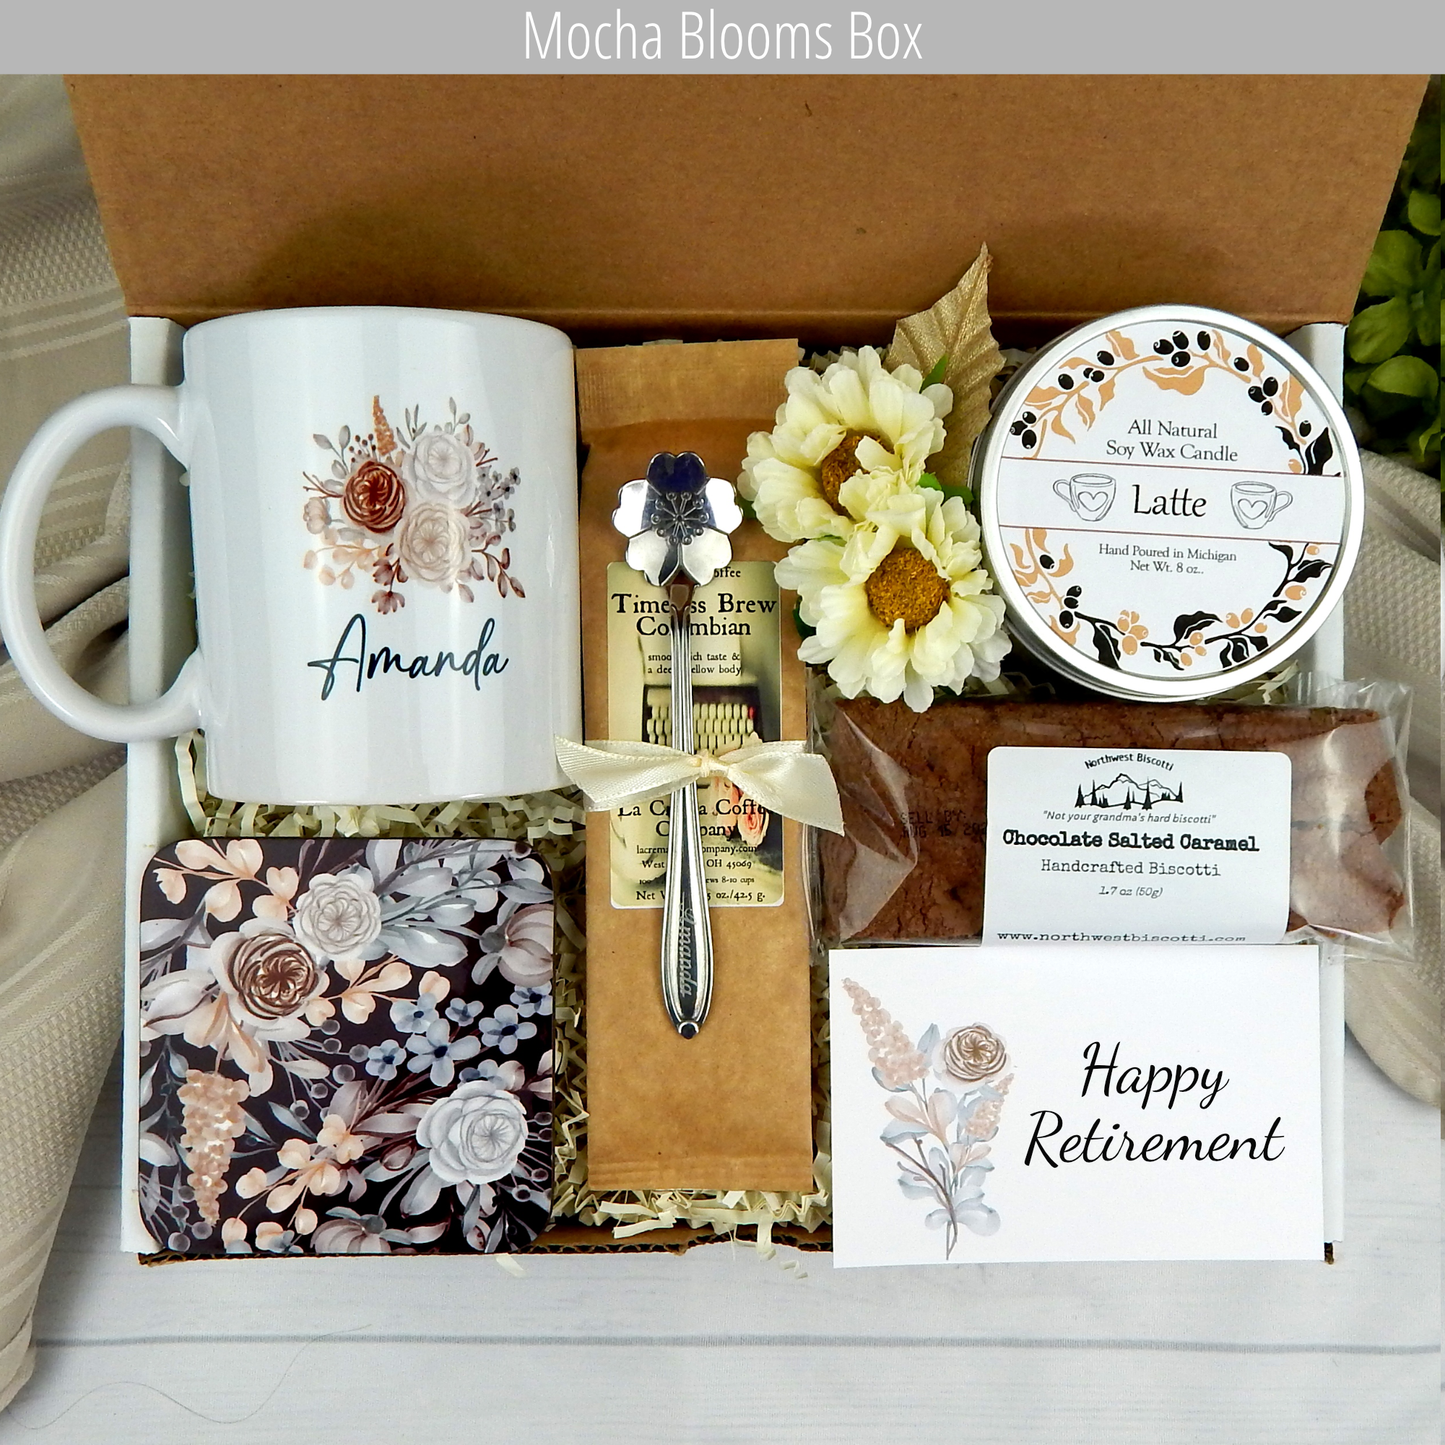 Cheers to Retirement: Women's care package featuring a personalized name mug, gourmet coffee, sweet goodies, engraved spoon, and candle.